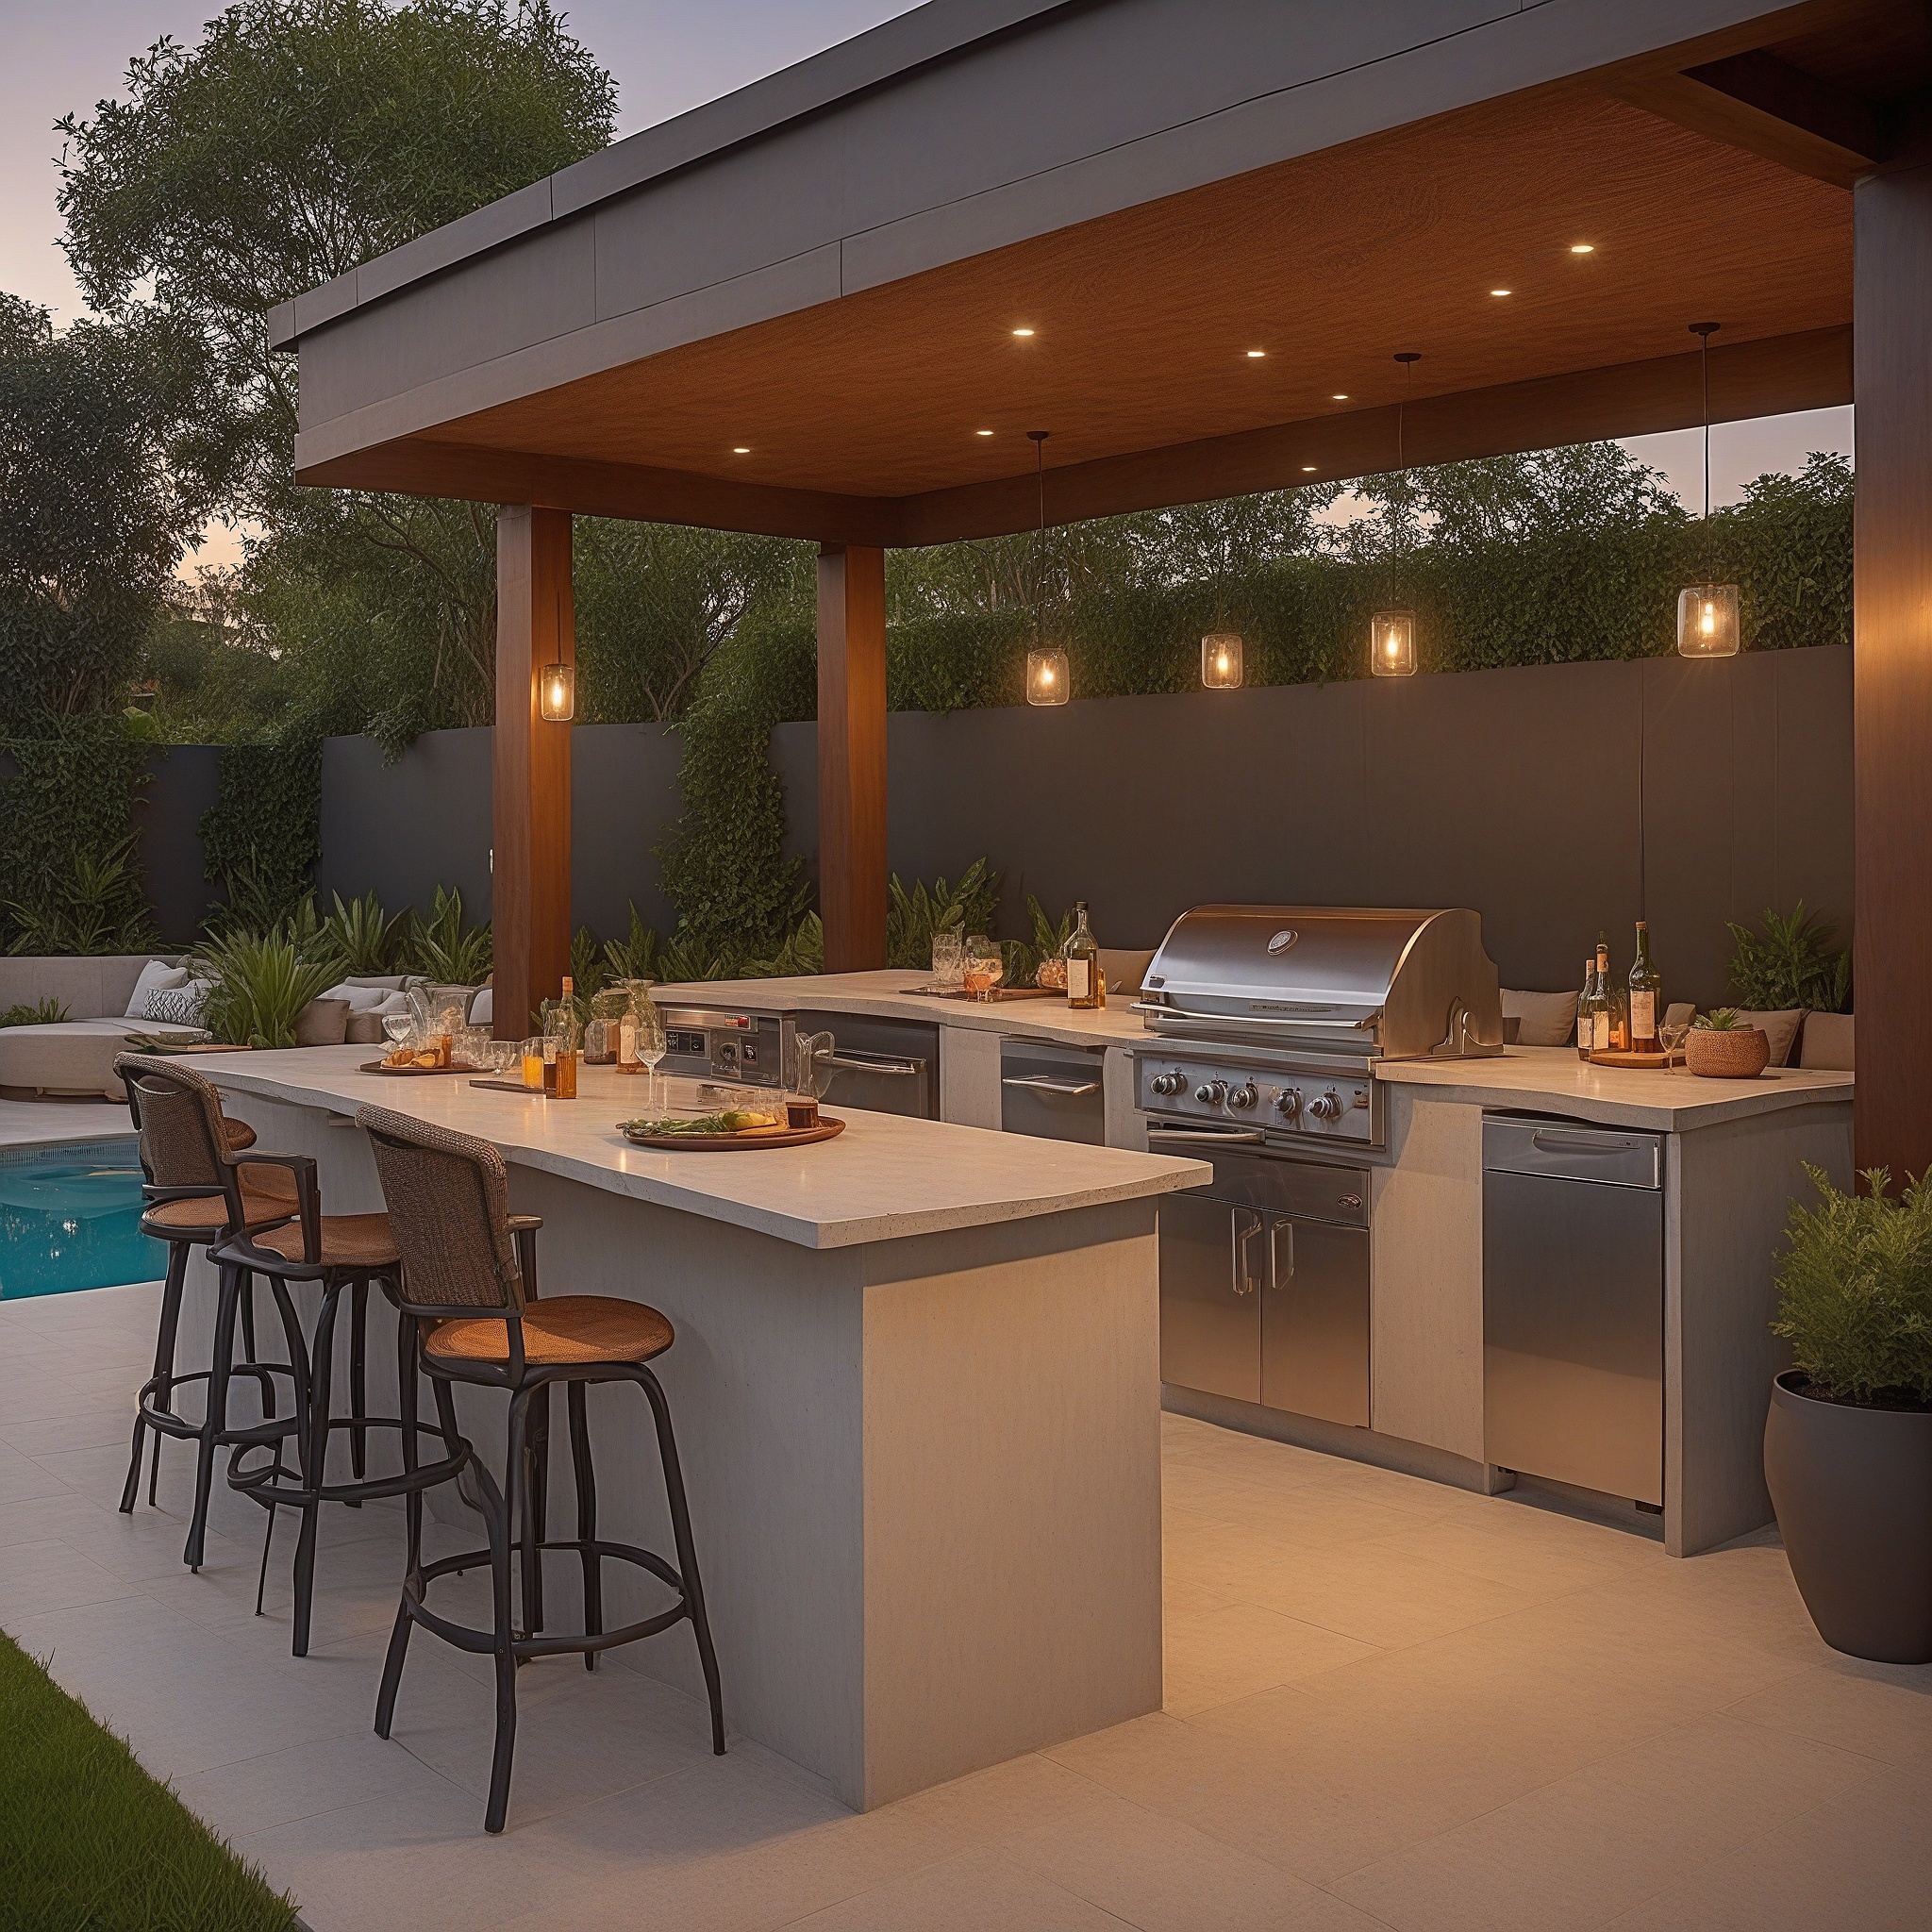 Built-in Outdoor Kitchen and a Bar Area